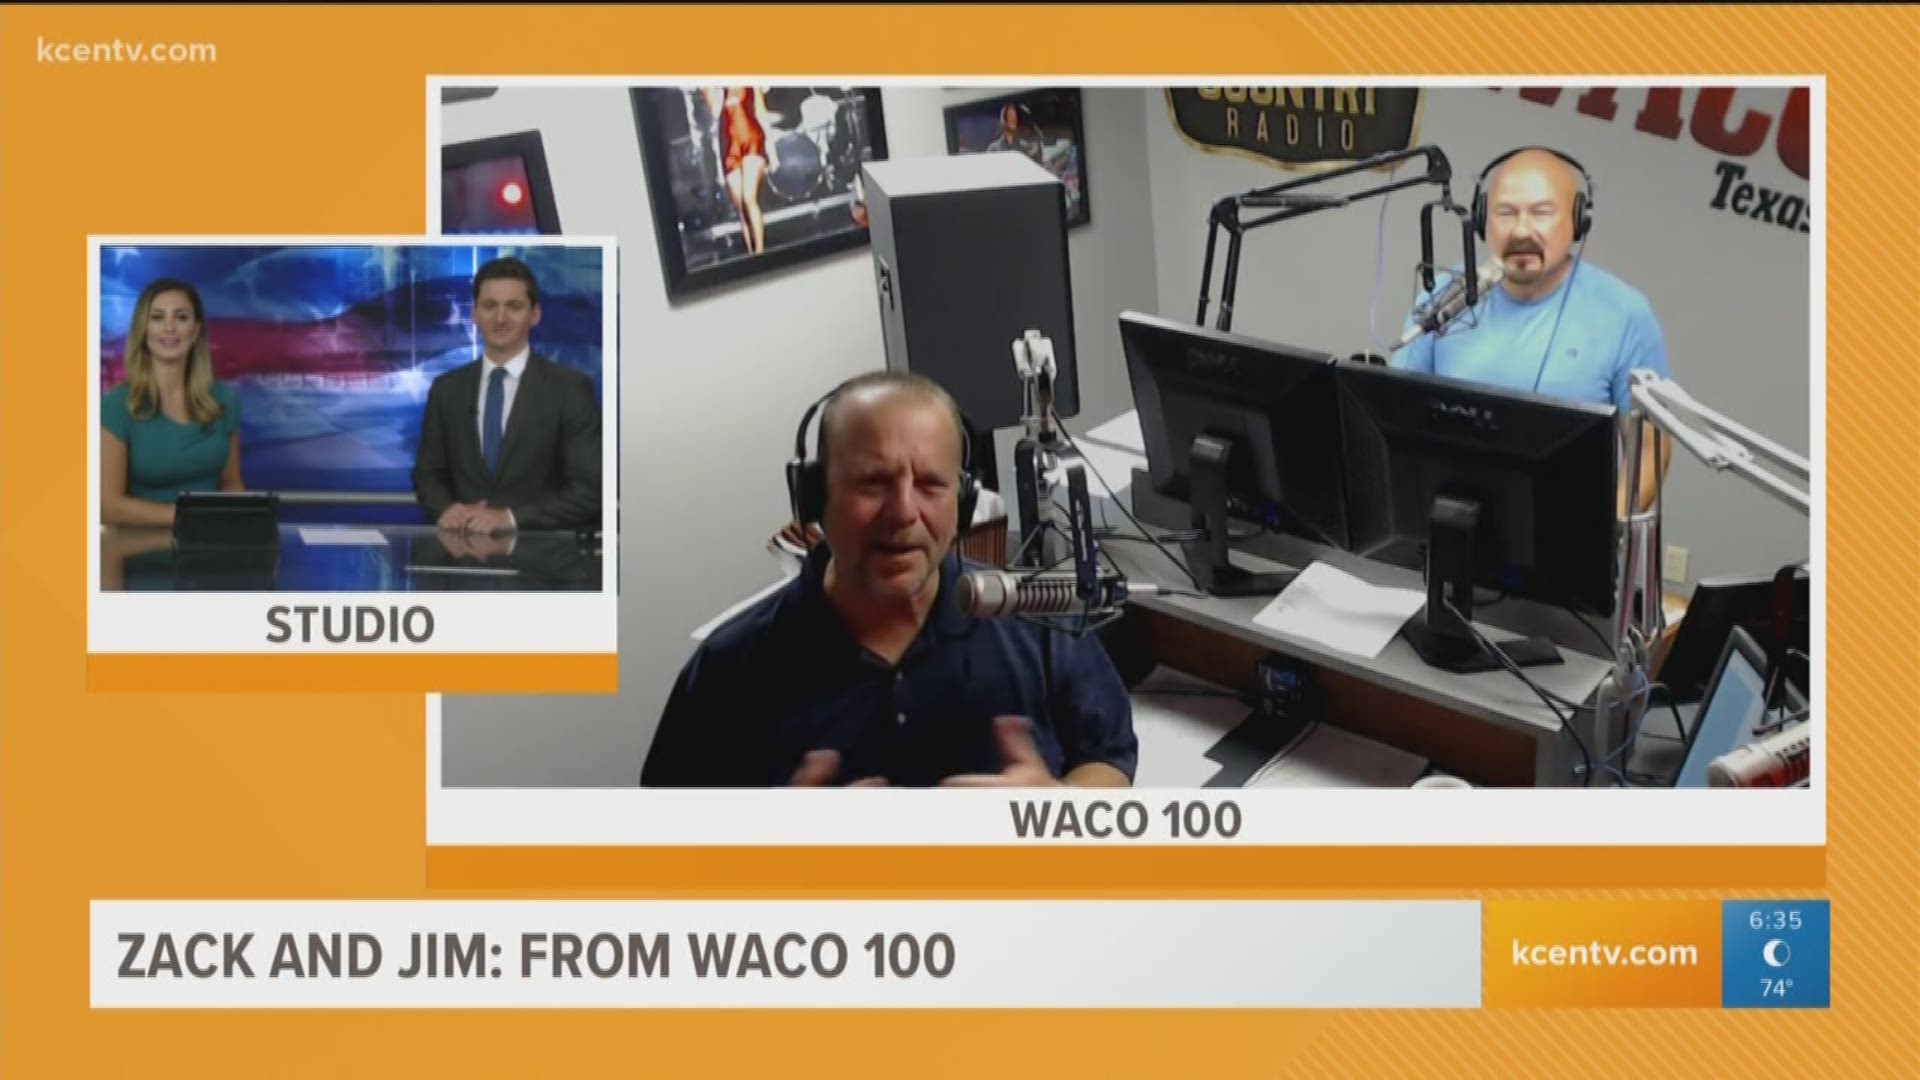 Live from Waco 100.